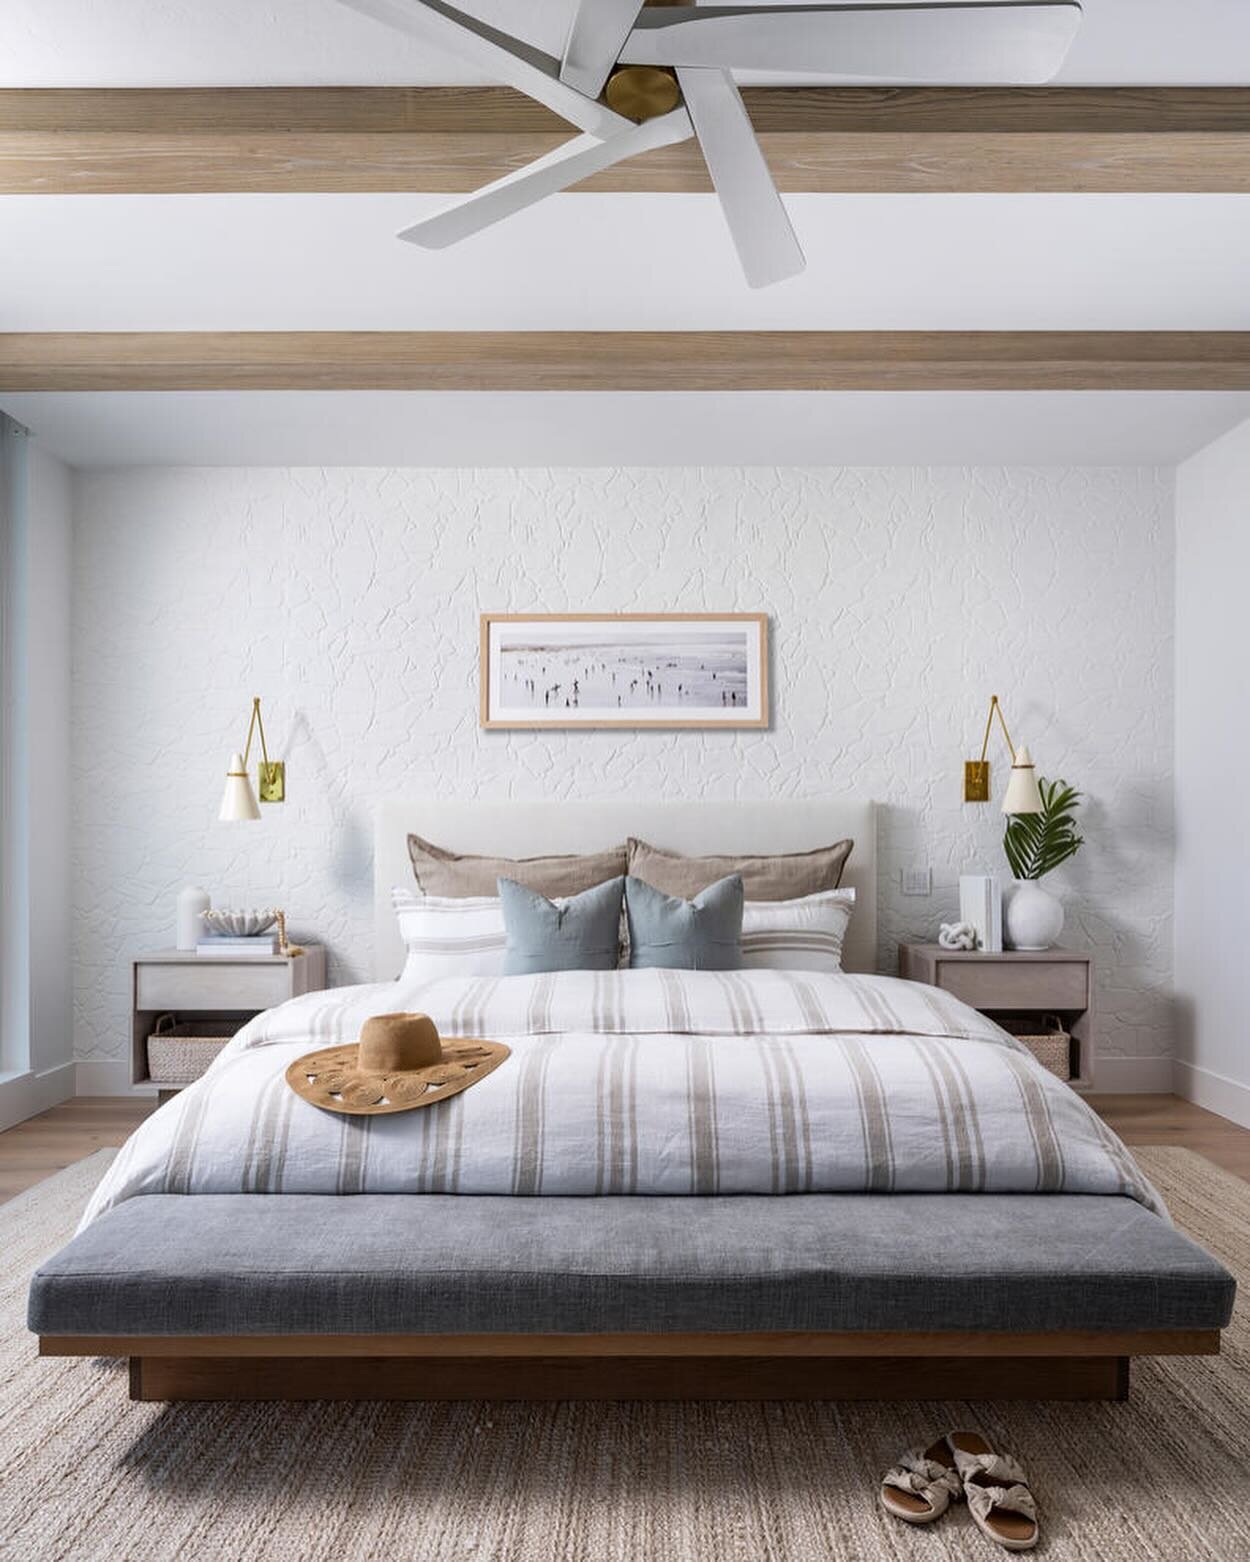 A fresh and understated take on modern coastal &hellip; just add beach views 🪄
Swipe to see the blank canvas we started with. 
#kaleabay #harperhausinteriors #makeyourhausahome #beforeandafter #transformation #hometransformation #coastalbedroom #flo